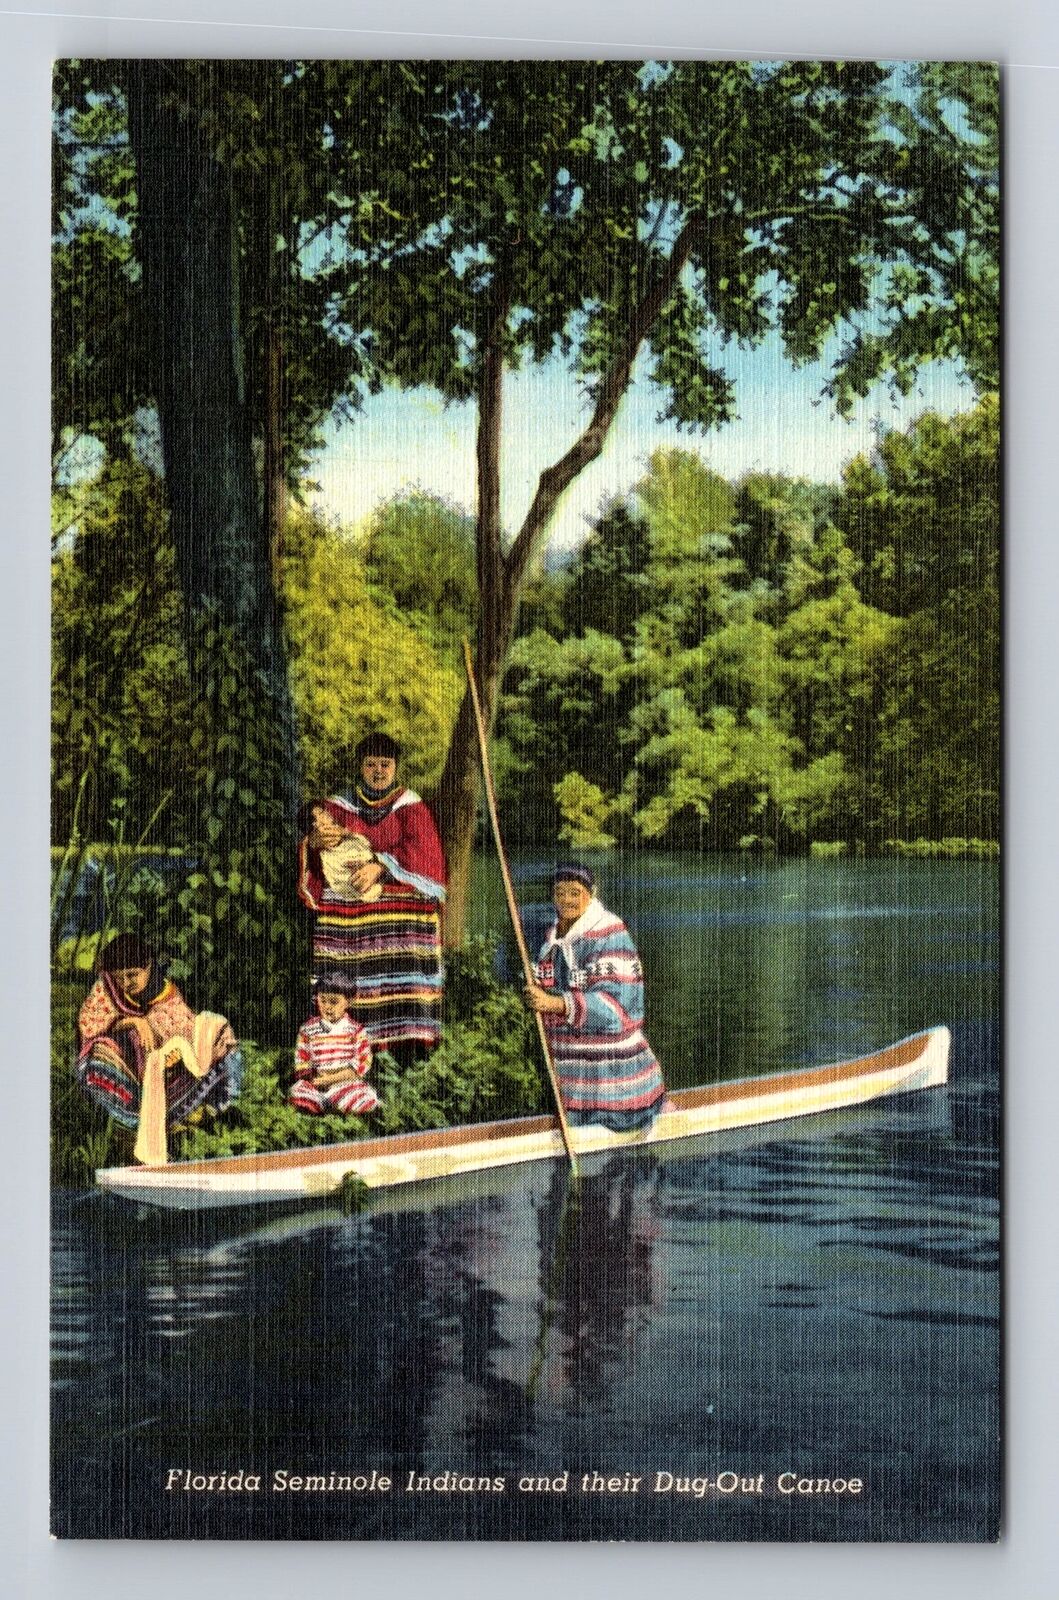 FL-Florida, Seminole Indians And Their Dug Out Canoe, Antique, Vintage Postcard